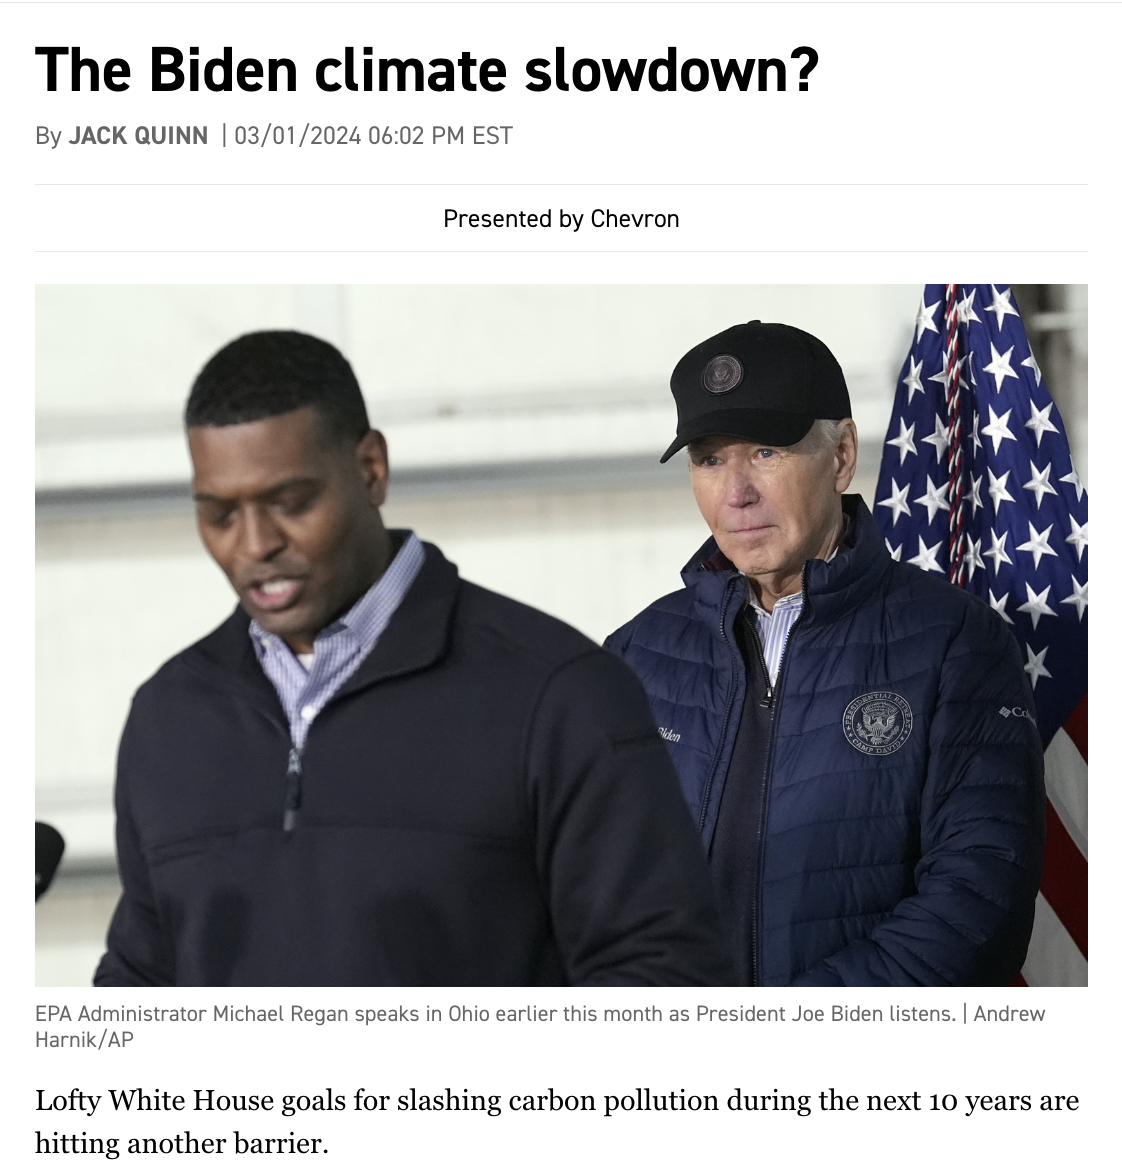 climatedepot.com - Politico: 'The Biden climate slowdown?' - 'Lofty White House goals for slashing' emissions 'are hitting another barrier'